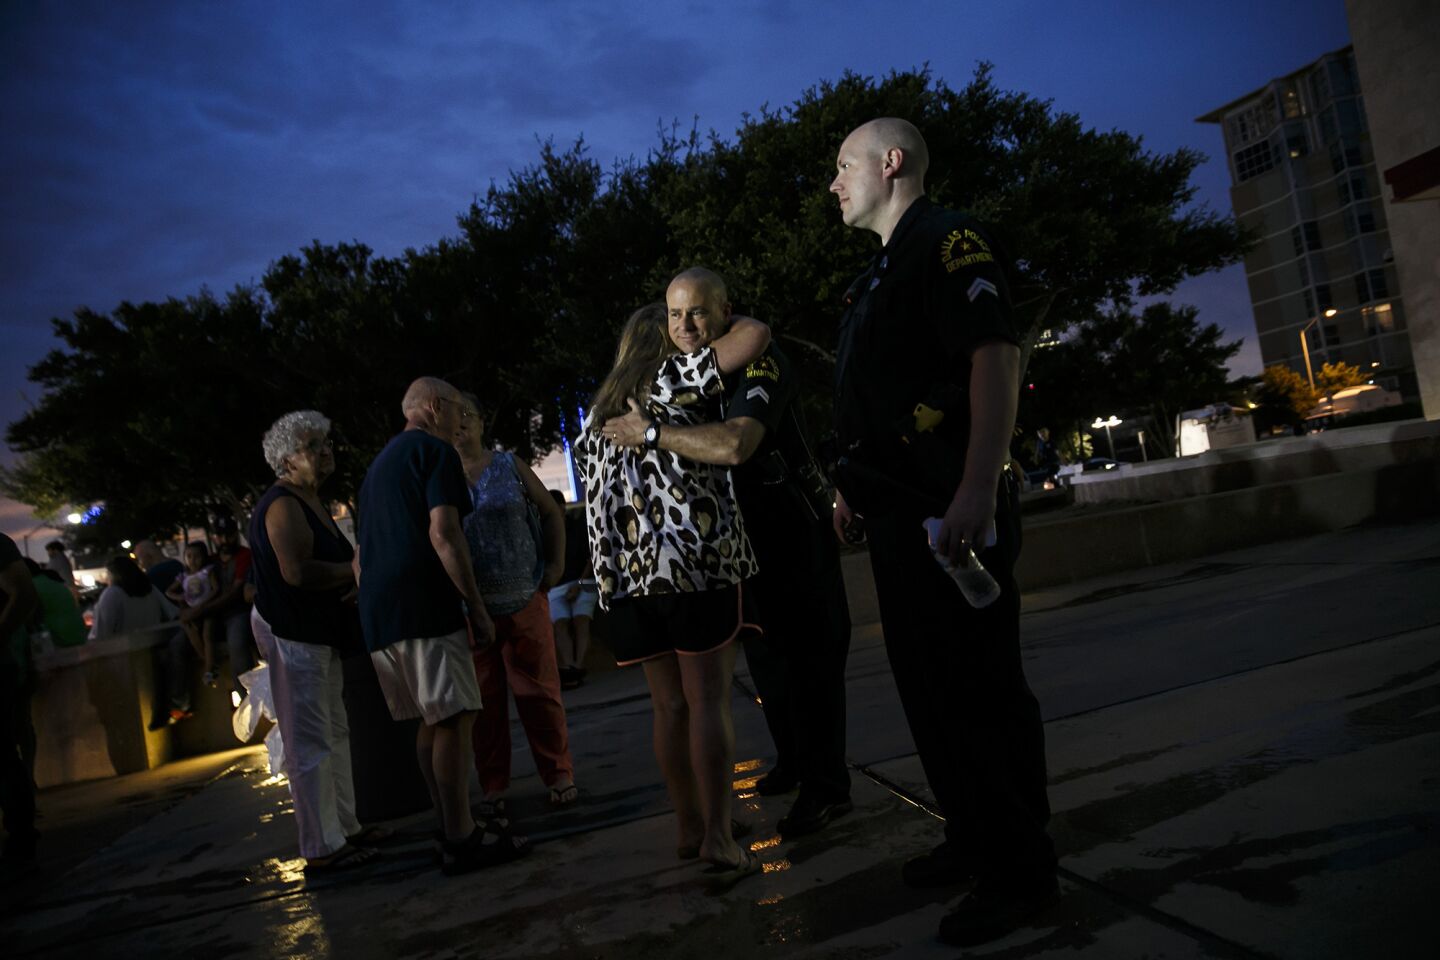 People give hugs to Dallas police officers standing outside the memorial for slain officers in the recent attacks in Dallas.